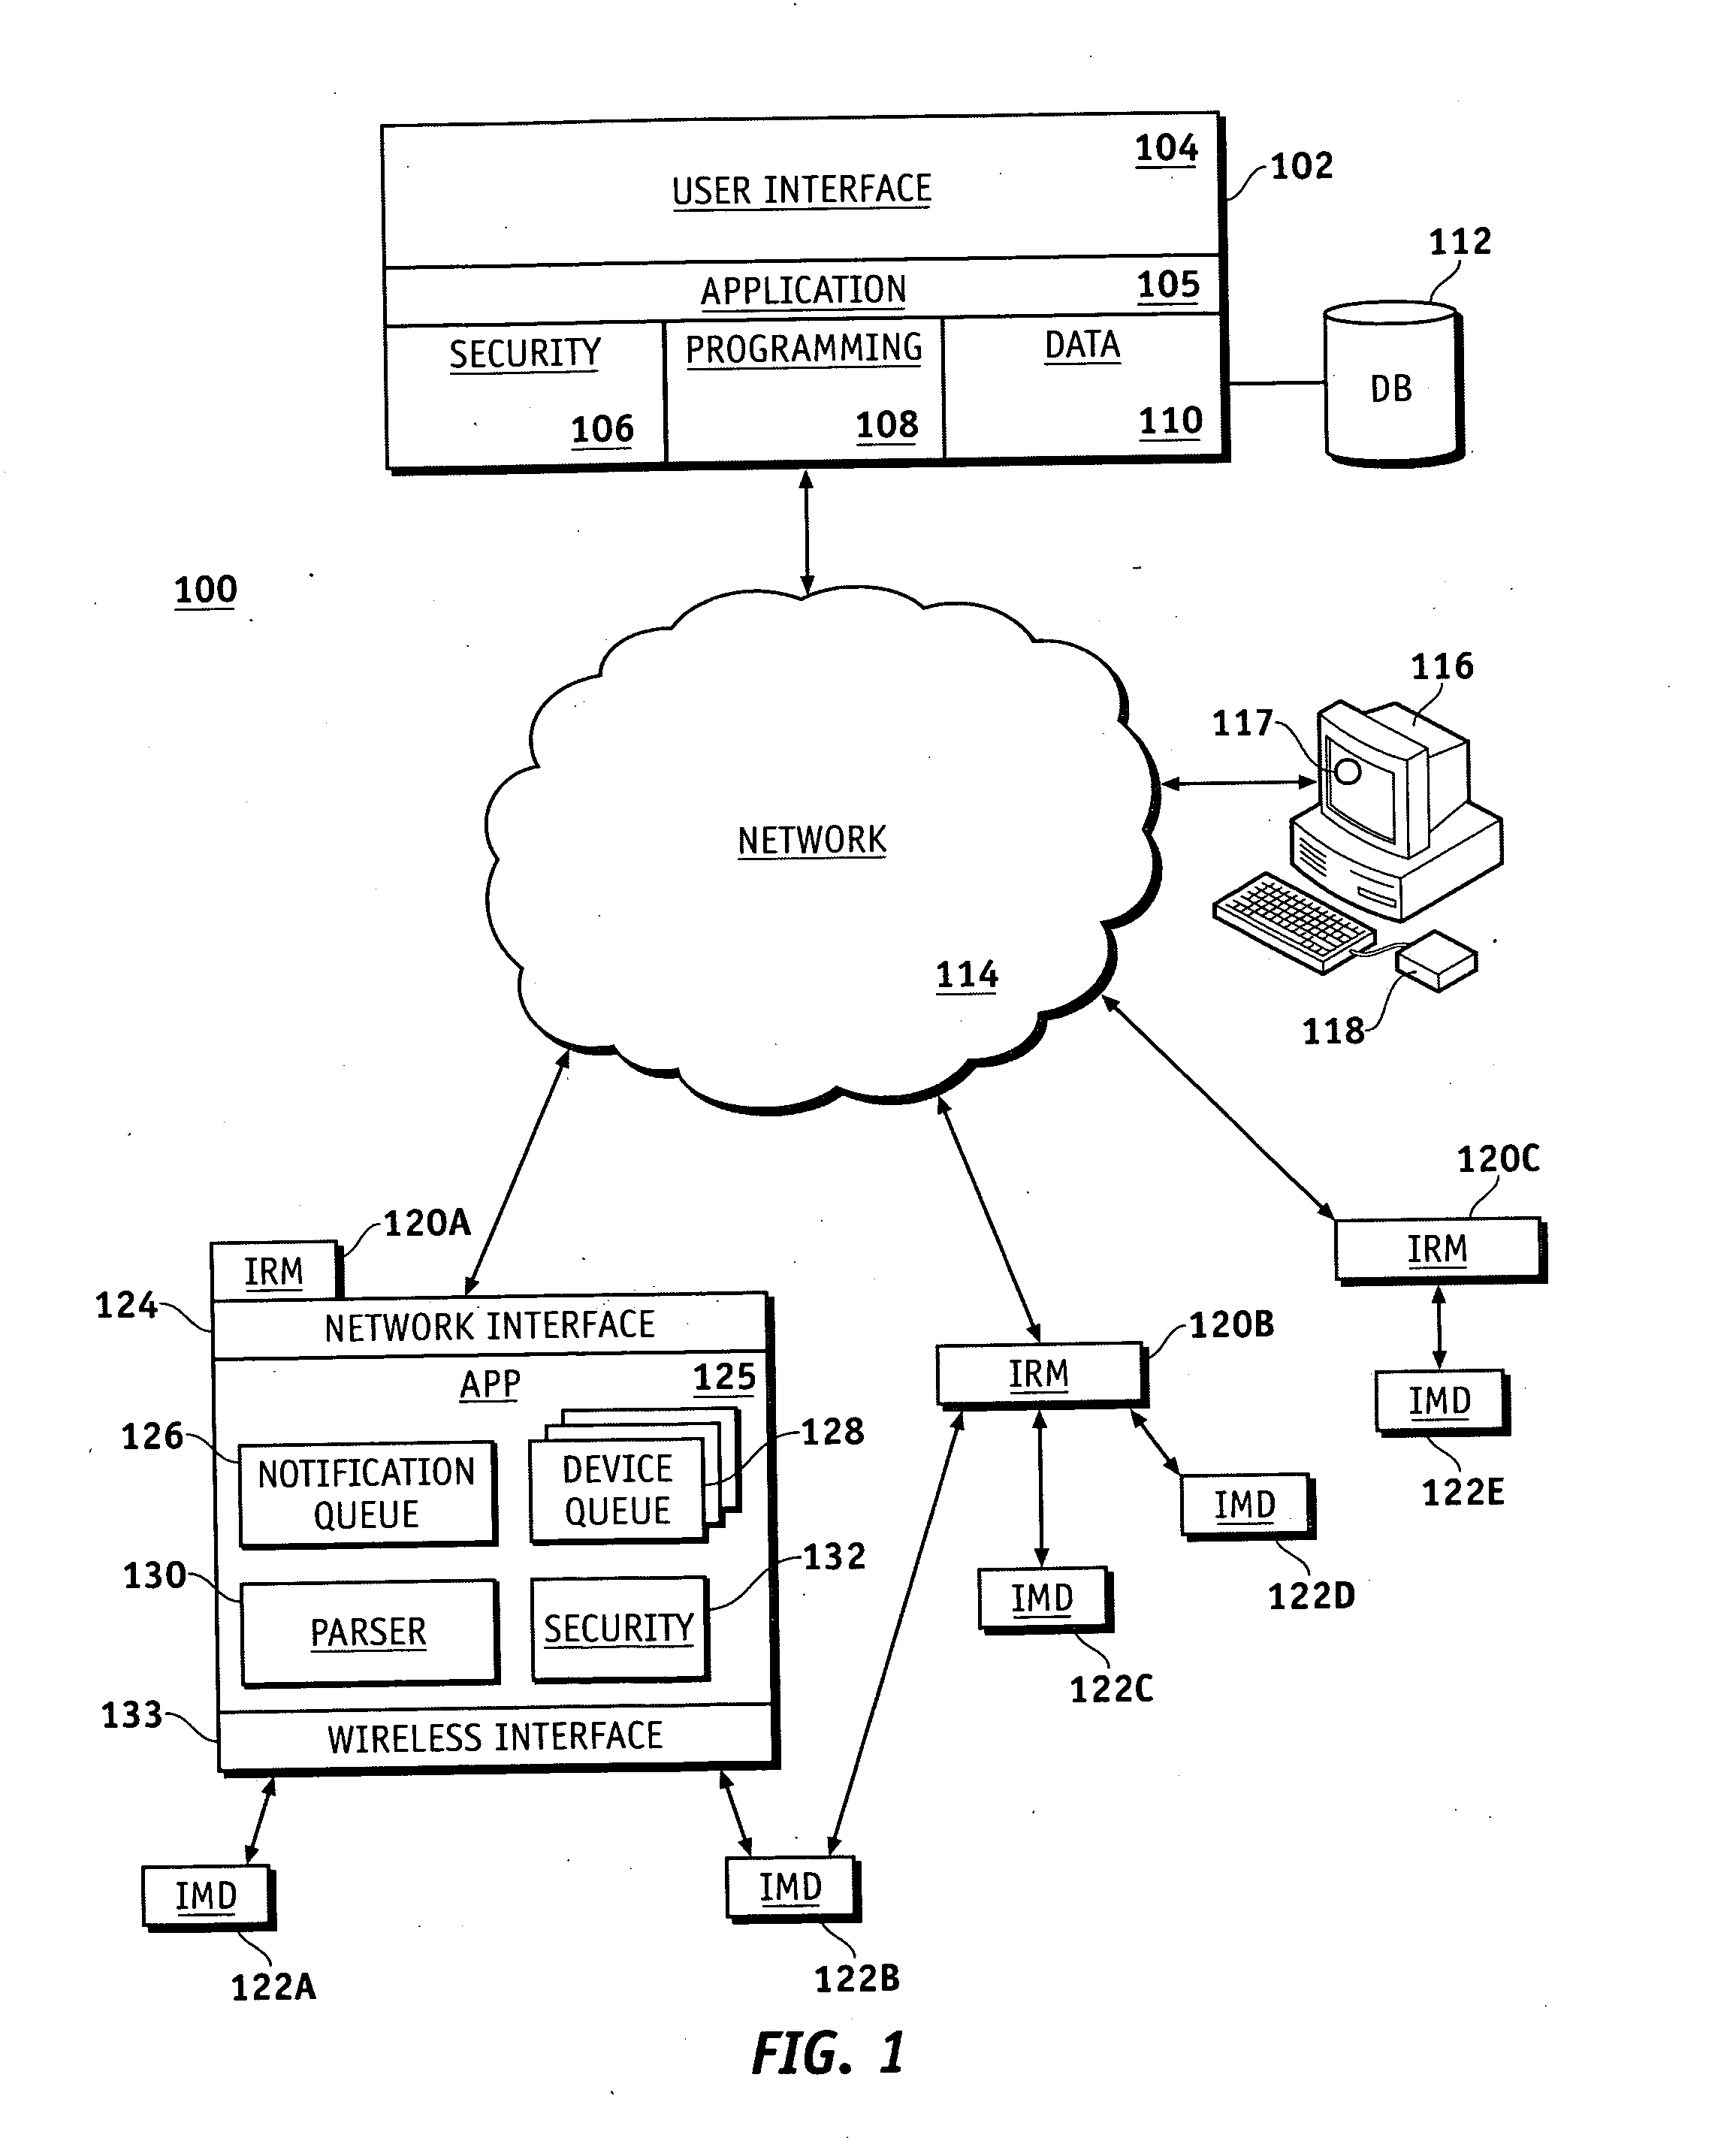 Command sequencing and interlocks for a remotely programmable implantable device